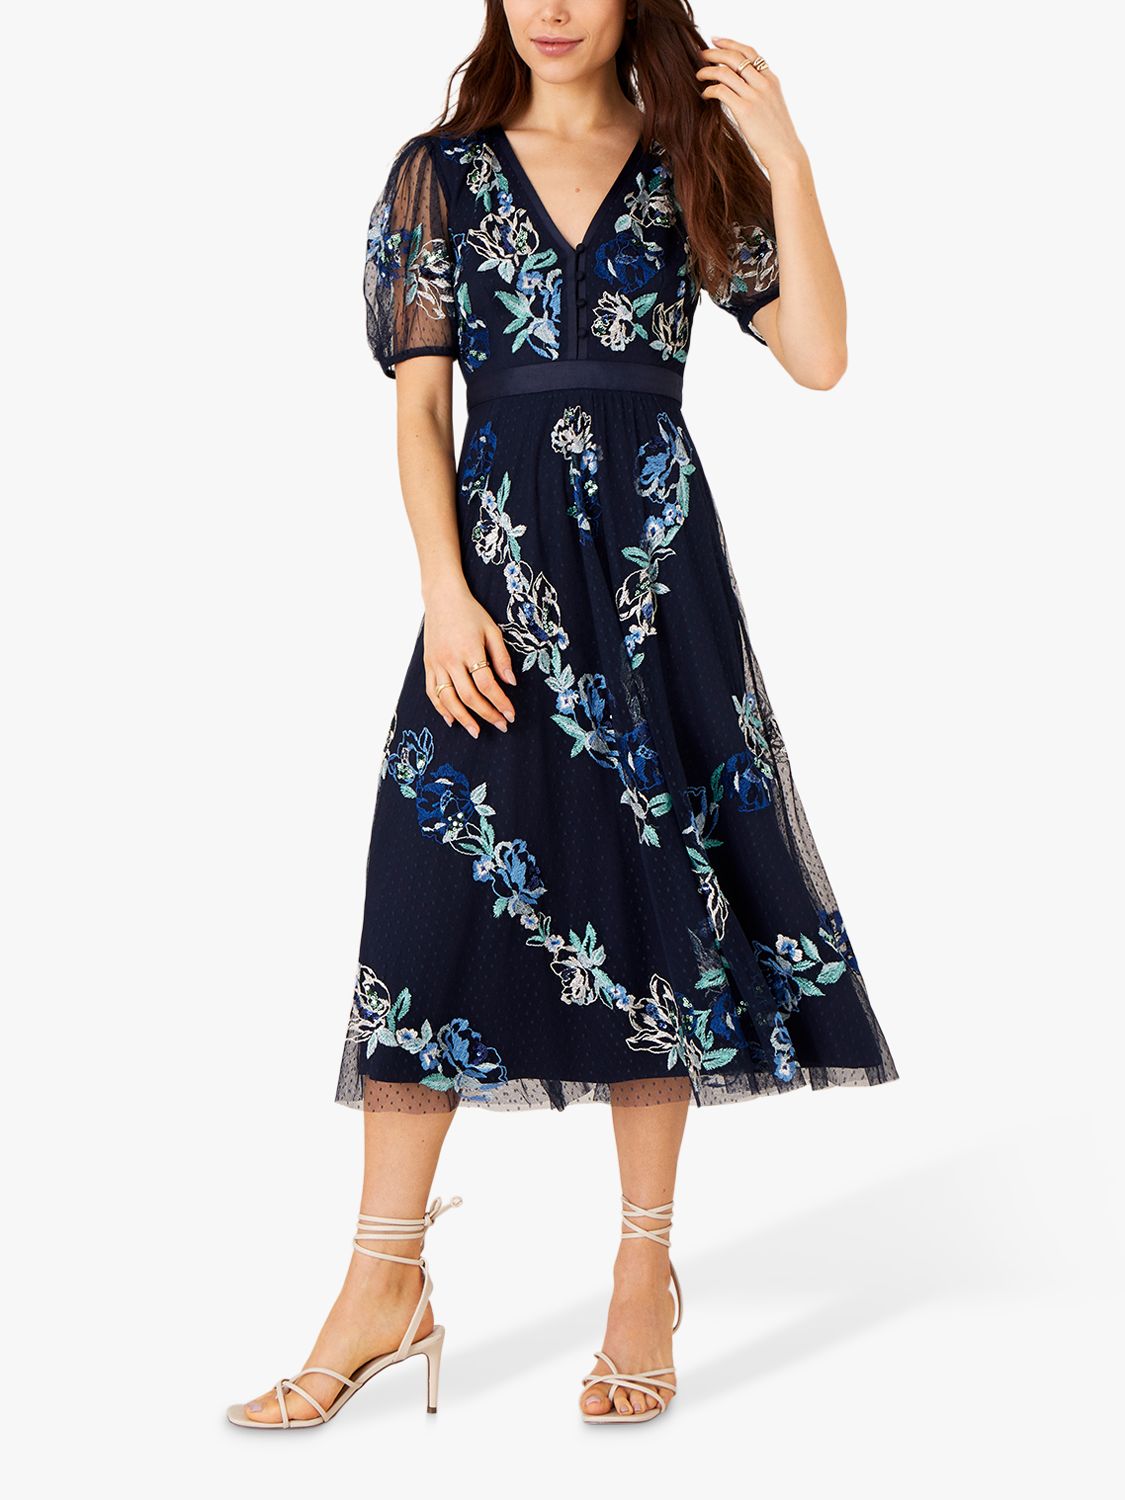 Monsoon Embroidered Floral Midi Dress, Navy at John Lewis & Partners